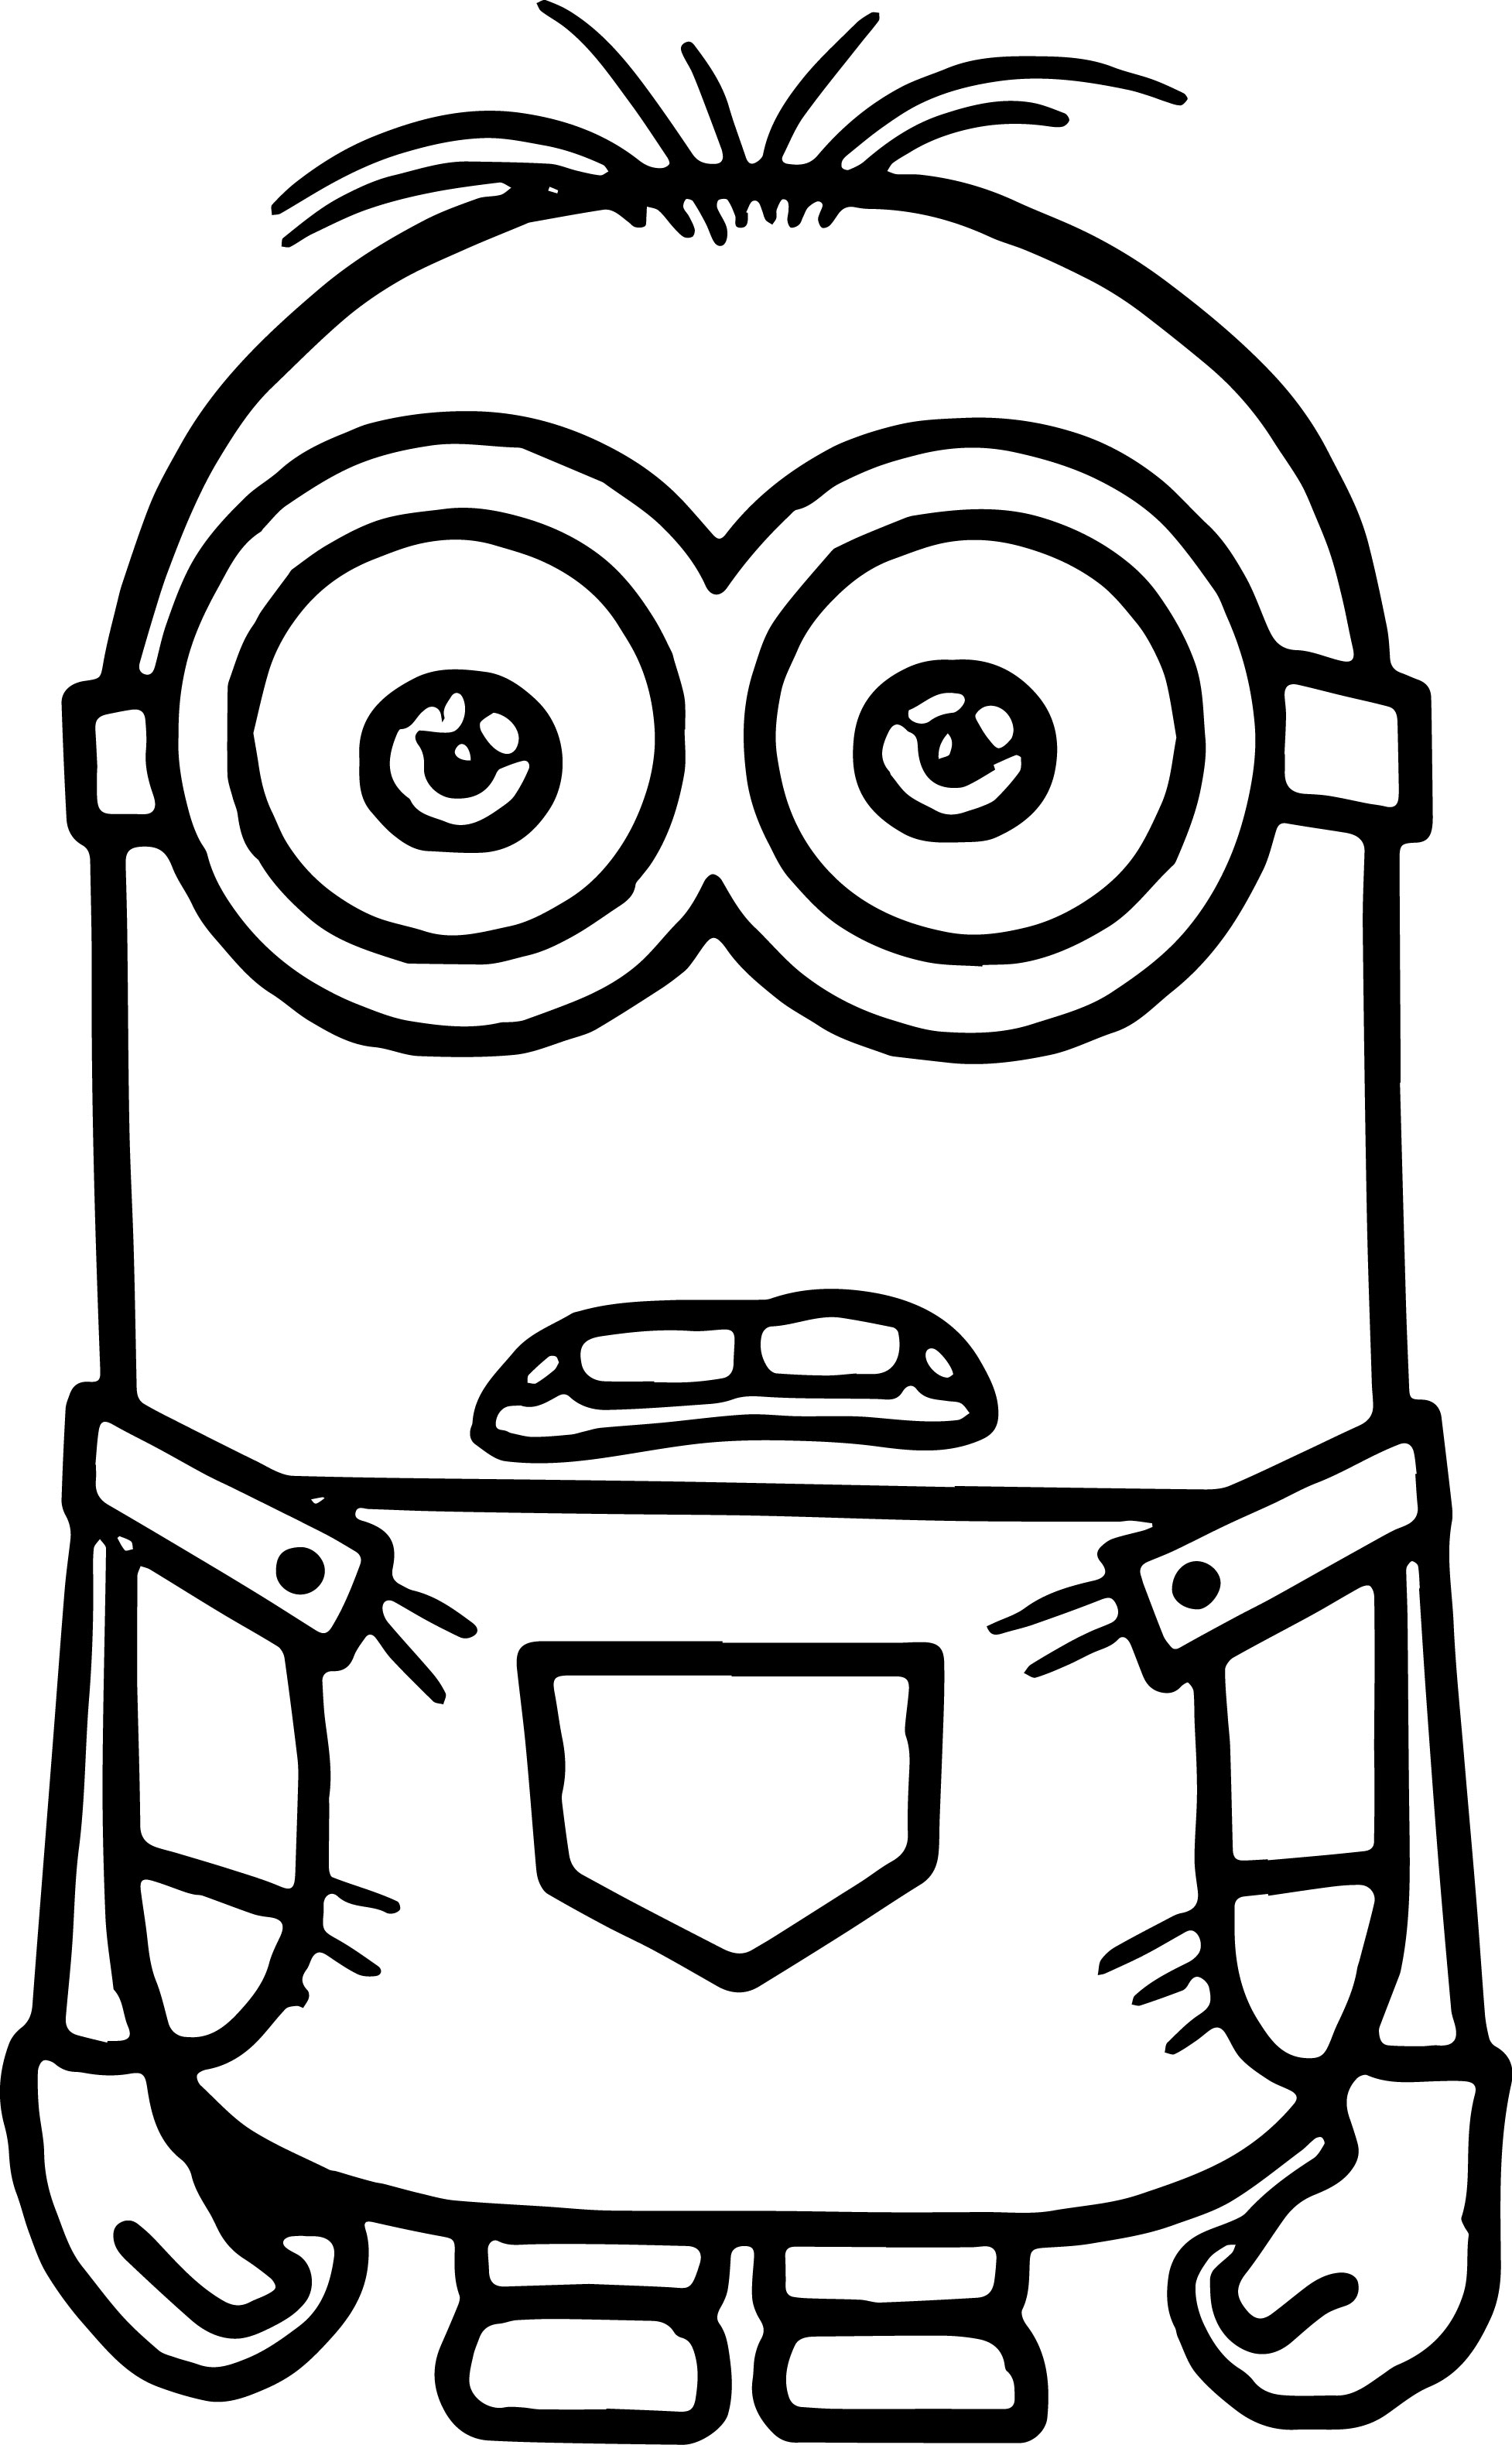 Minion Coloring Pages | Fotolip.com Rich image and wallpaper